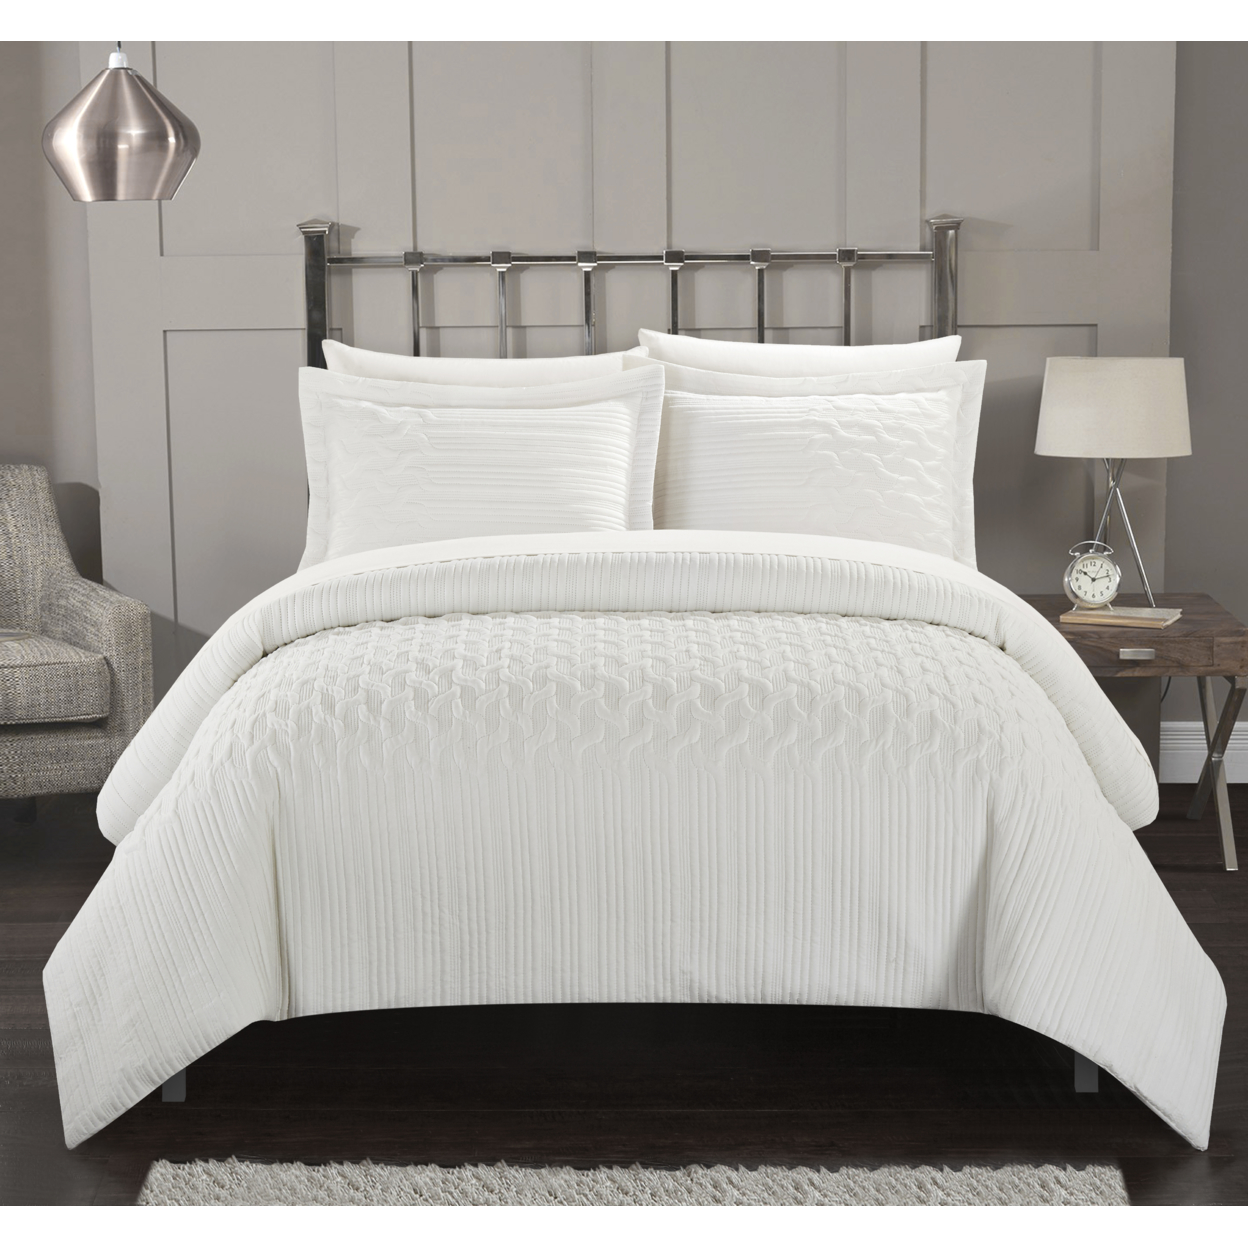 Jazmaine 3 Or 2 Piece Comforter Set Embossed Embroidered Quilted Geometric Vine Pattern Bedding - White, Queen